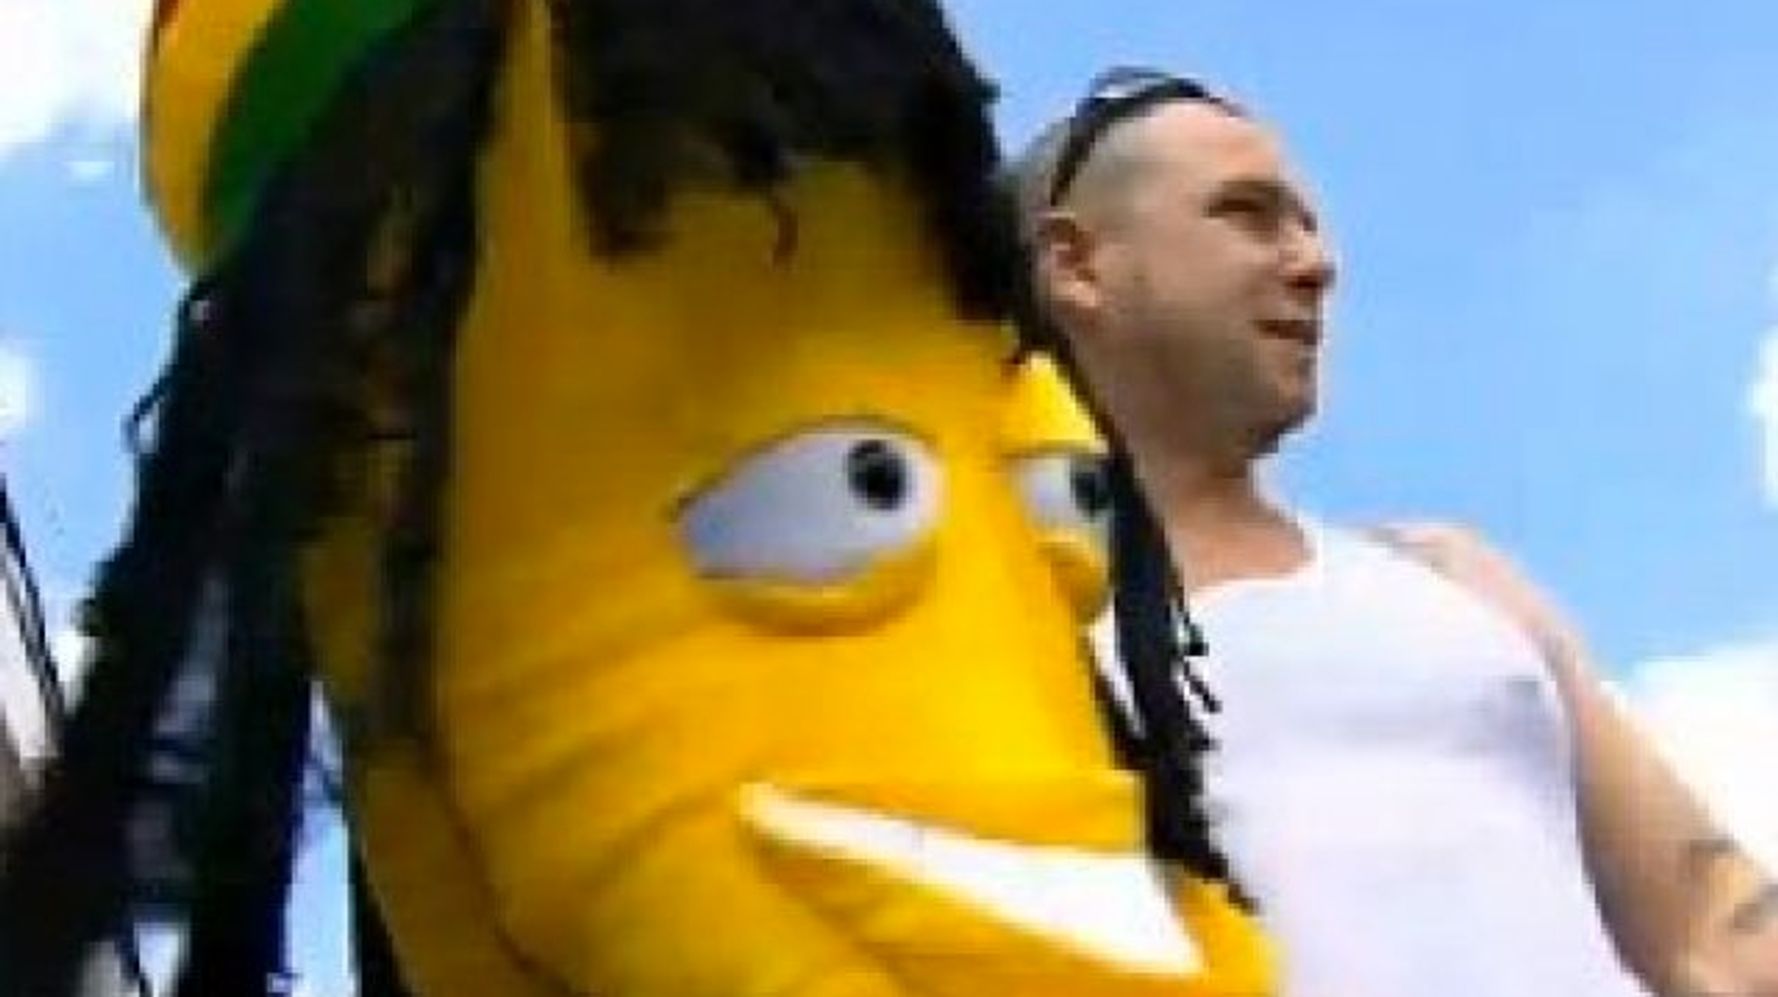 600 on a carnival game and won only a stuffed banana with dreadlocks, WLKY ...